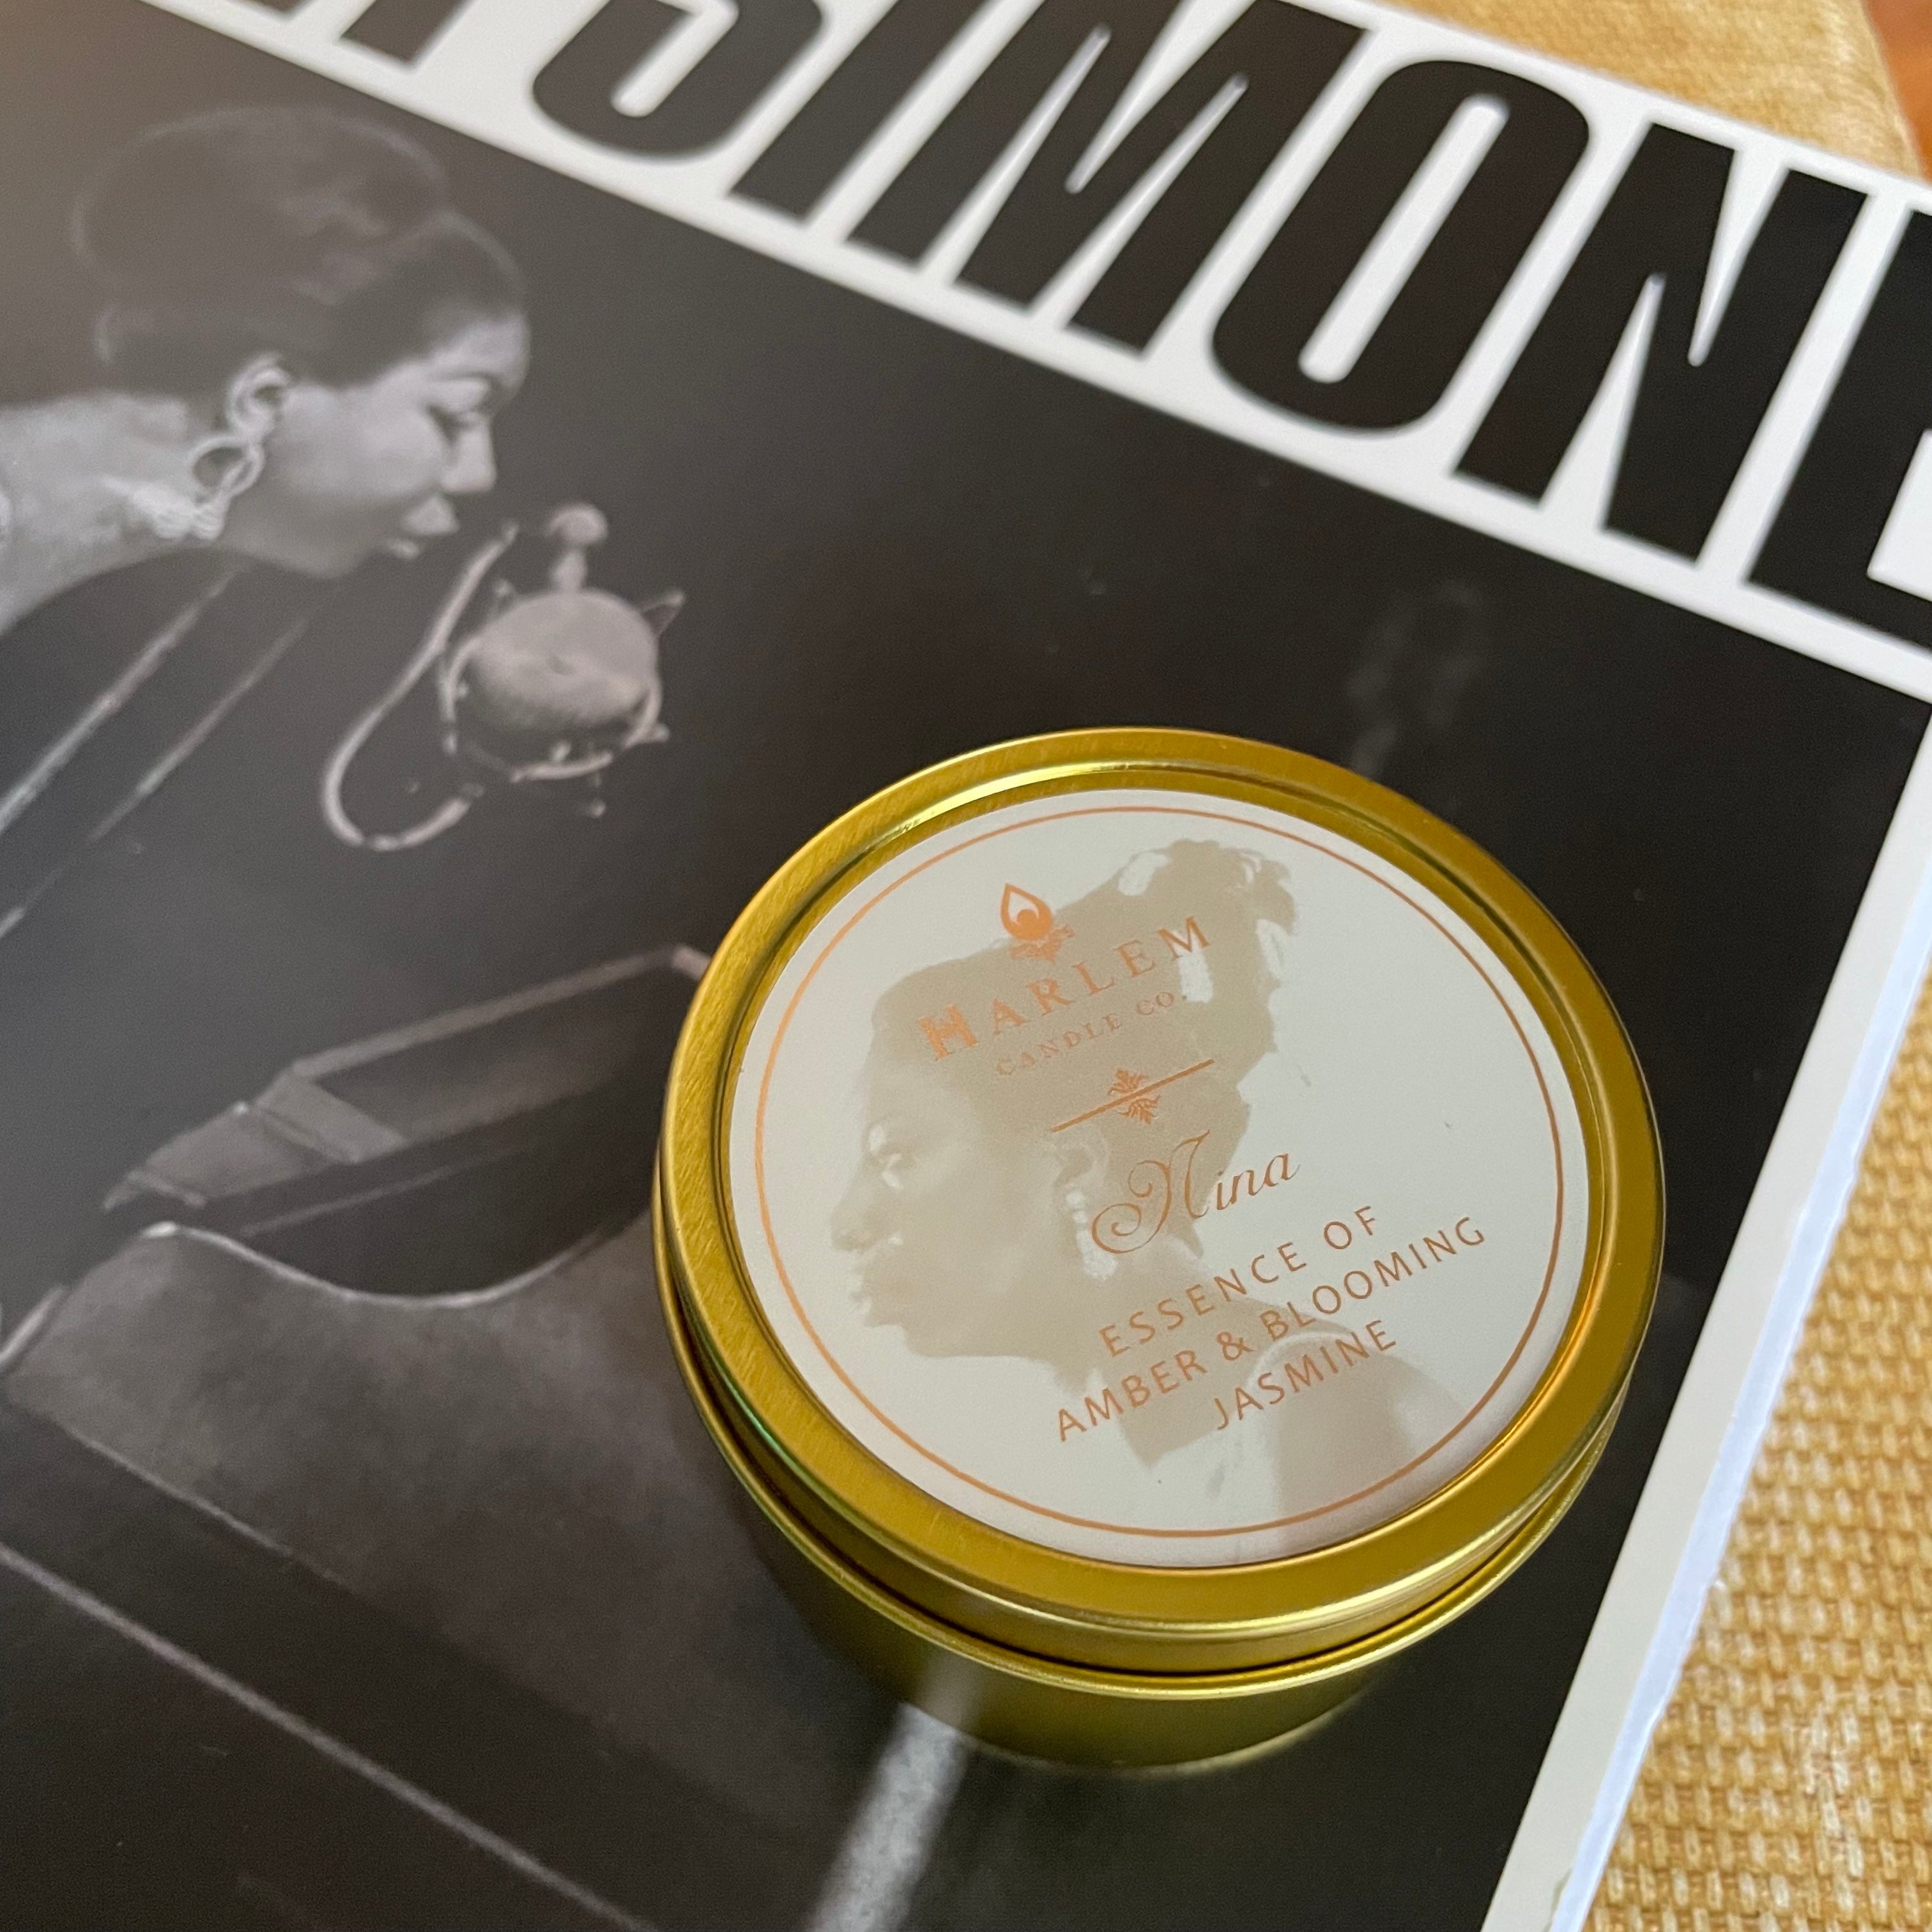 This is an image of the Nina Simone travel candle